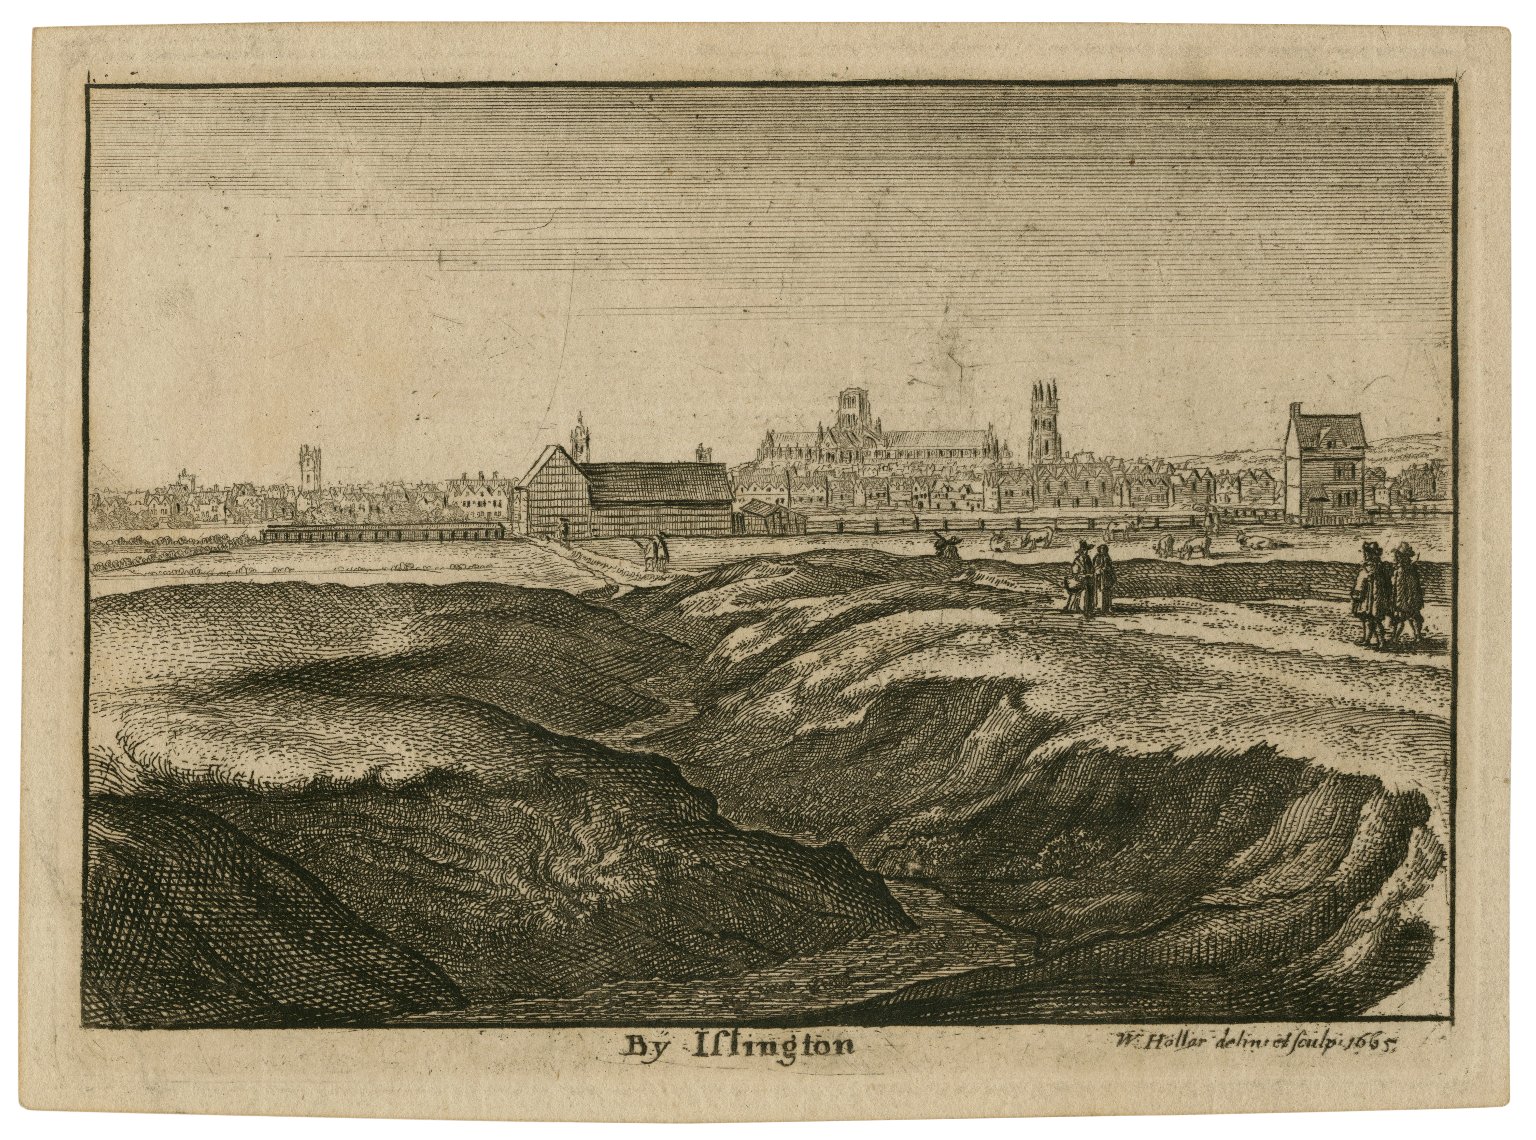 View of Islington, looking south towards London, by Wenceslaus Hollar. Image courtesy of the Folger Digital Image Collection.